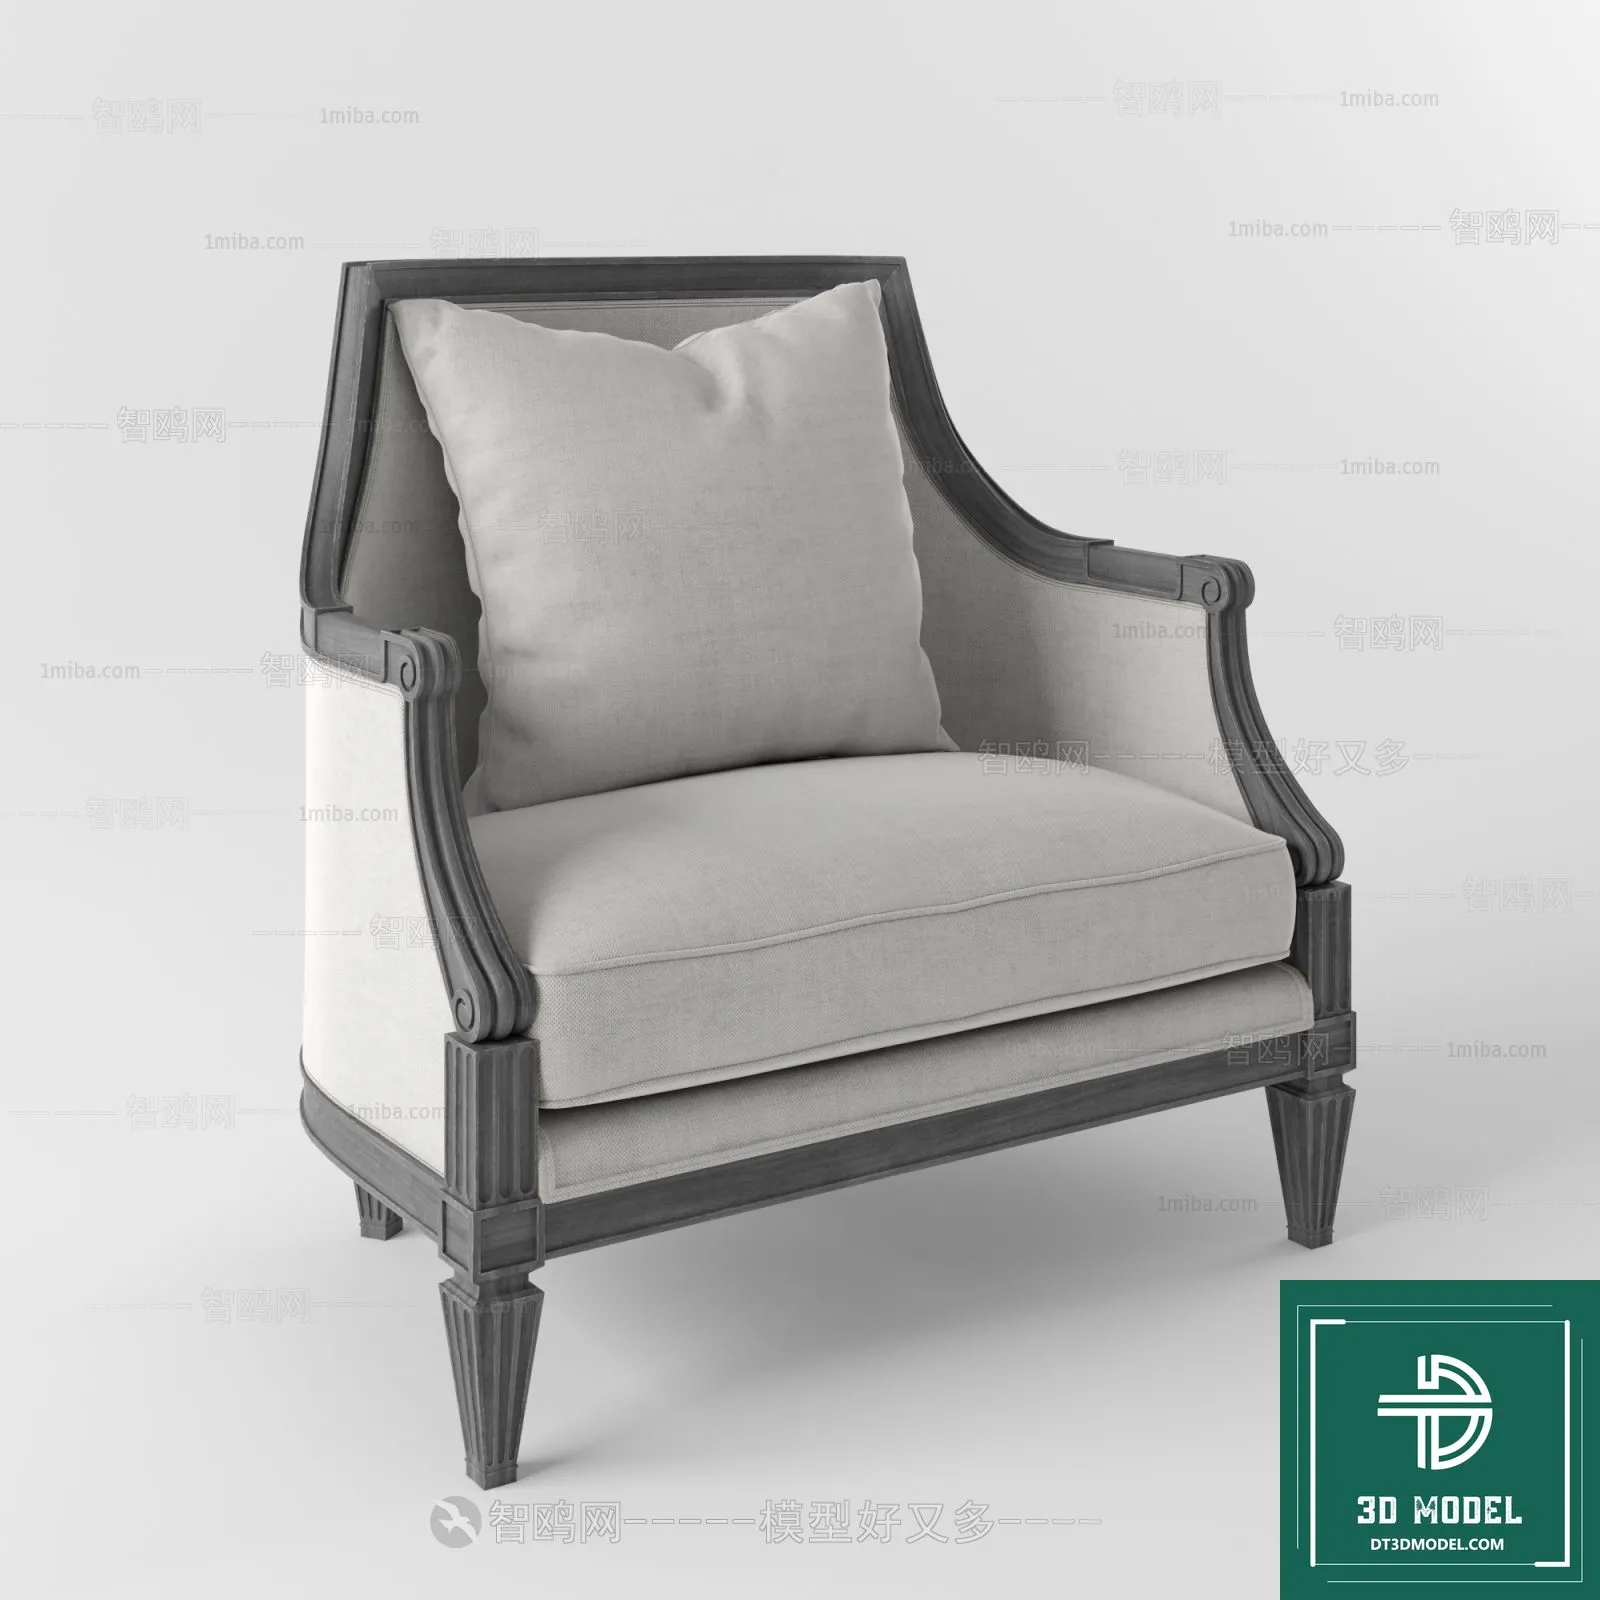 INDOCHINE STYLE – 3D MODELS – 913